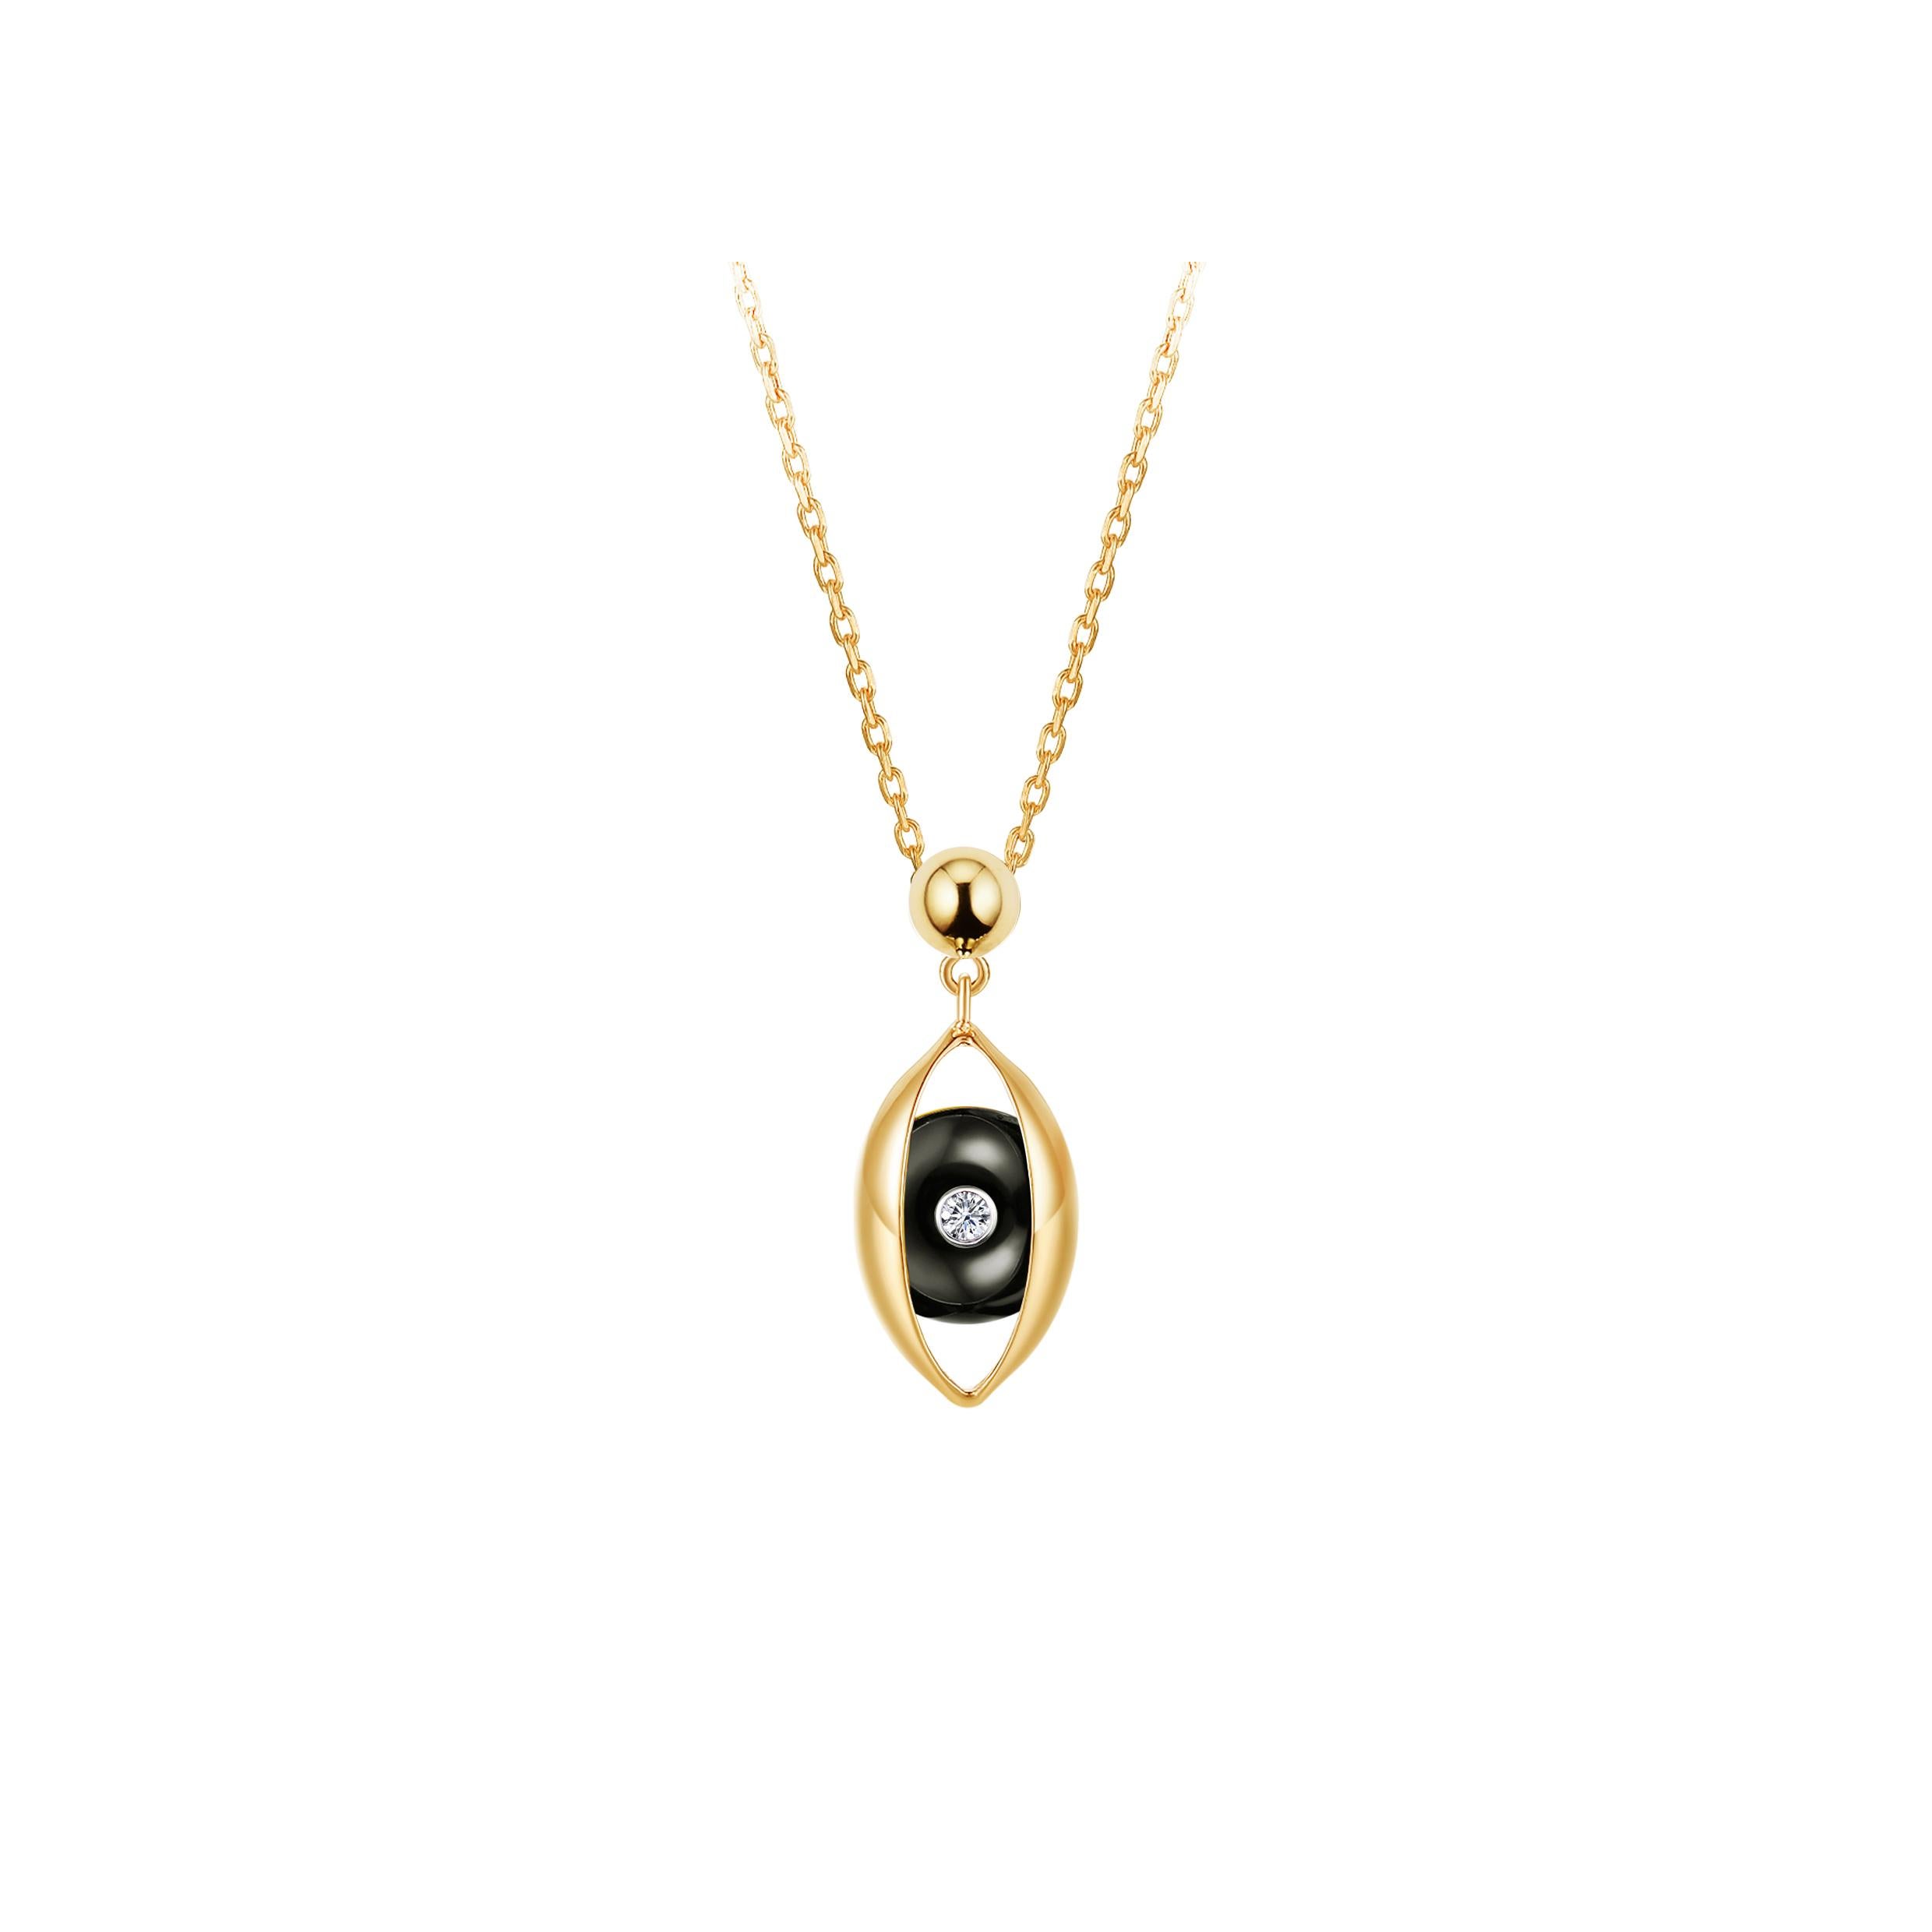 This very unique eye pendant necklace from The Eye collection, it's a perfect everyday talisman. The Eye collection showcases this award winning, fine jewellery designer’s extraordinary talent to work with shapes, materials, texture and, his